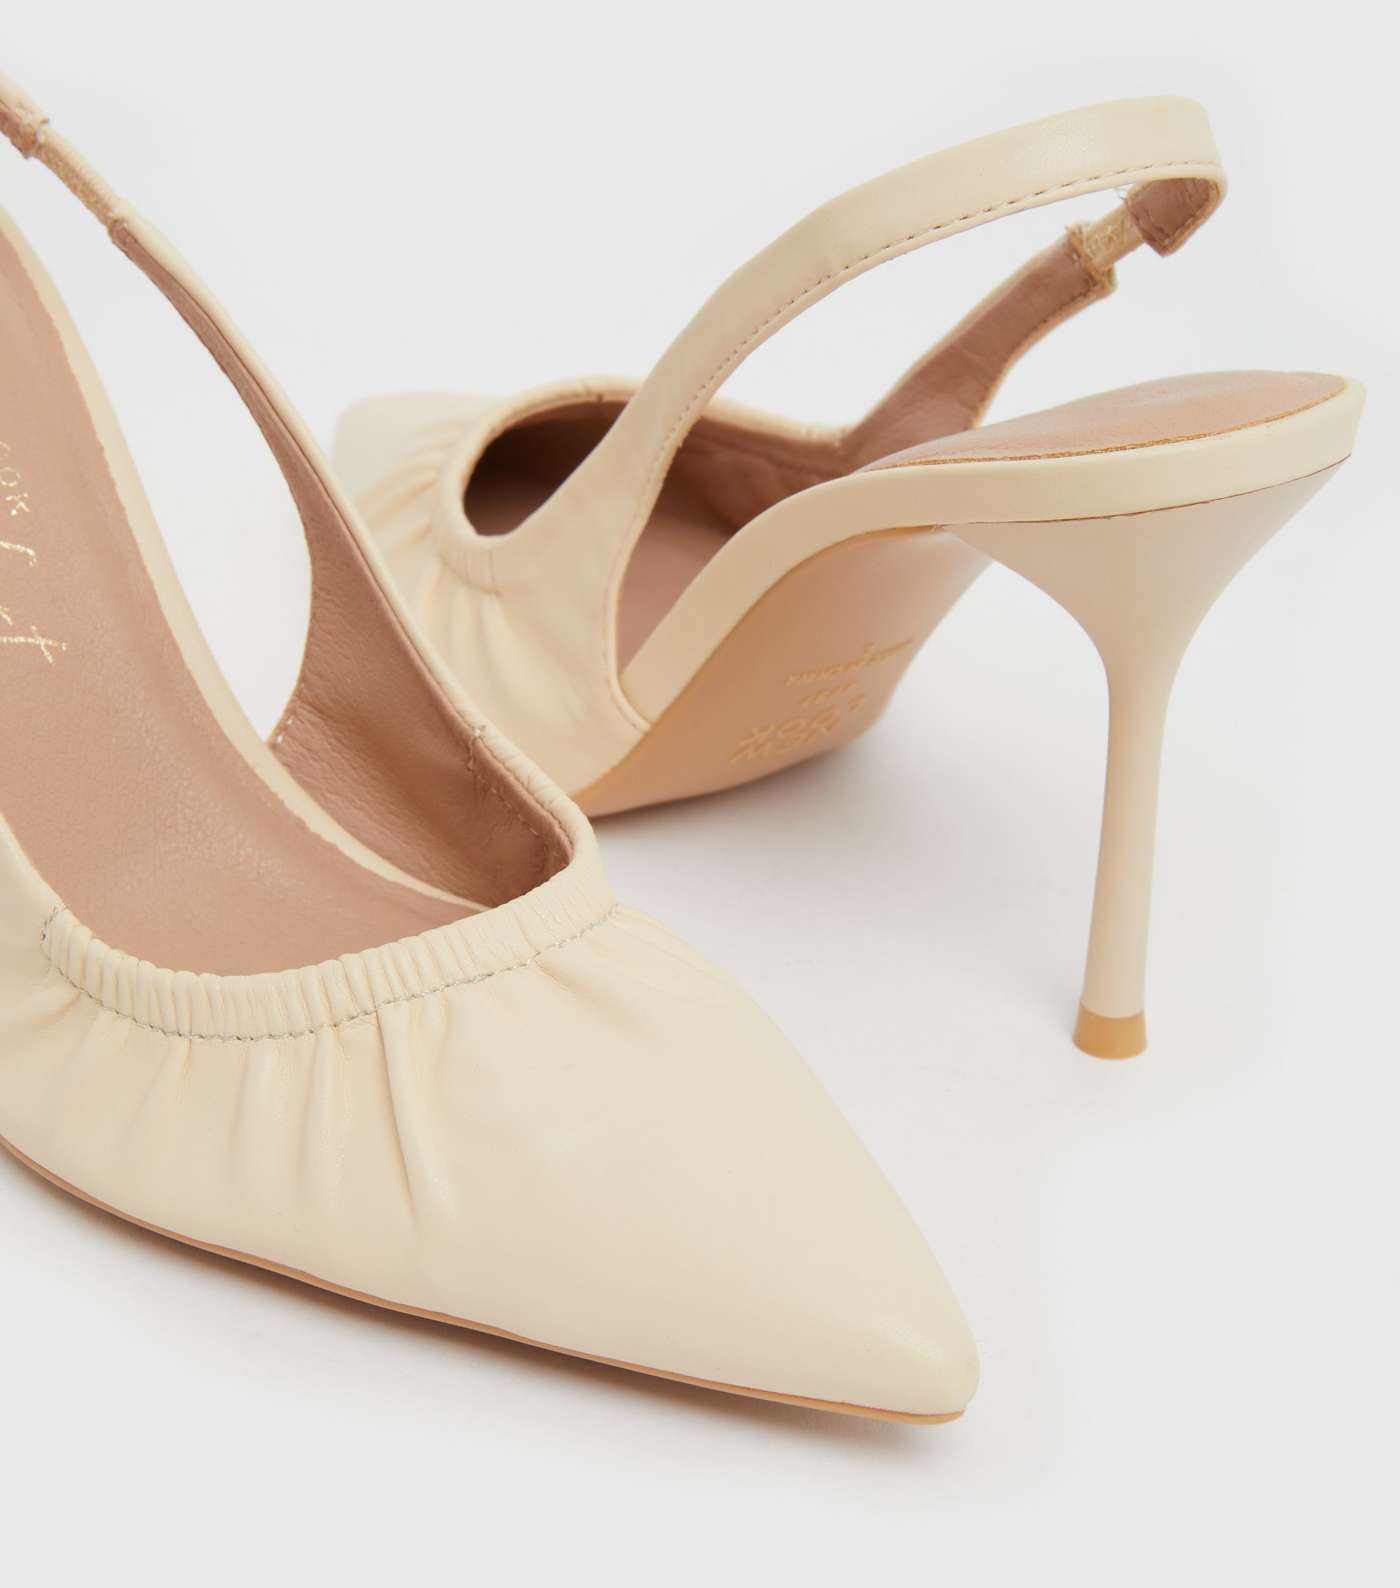 Off White Ruched Slingback Stiletto Heel Court Shoes Image 4